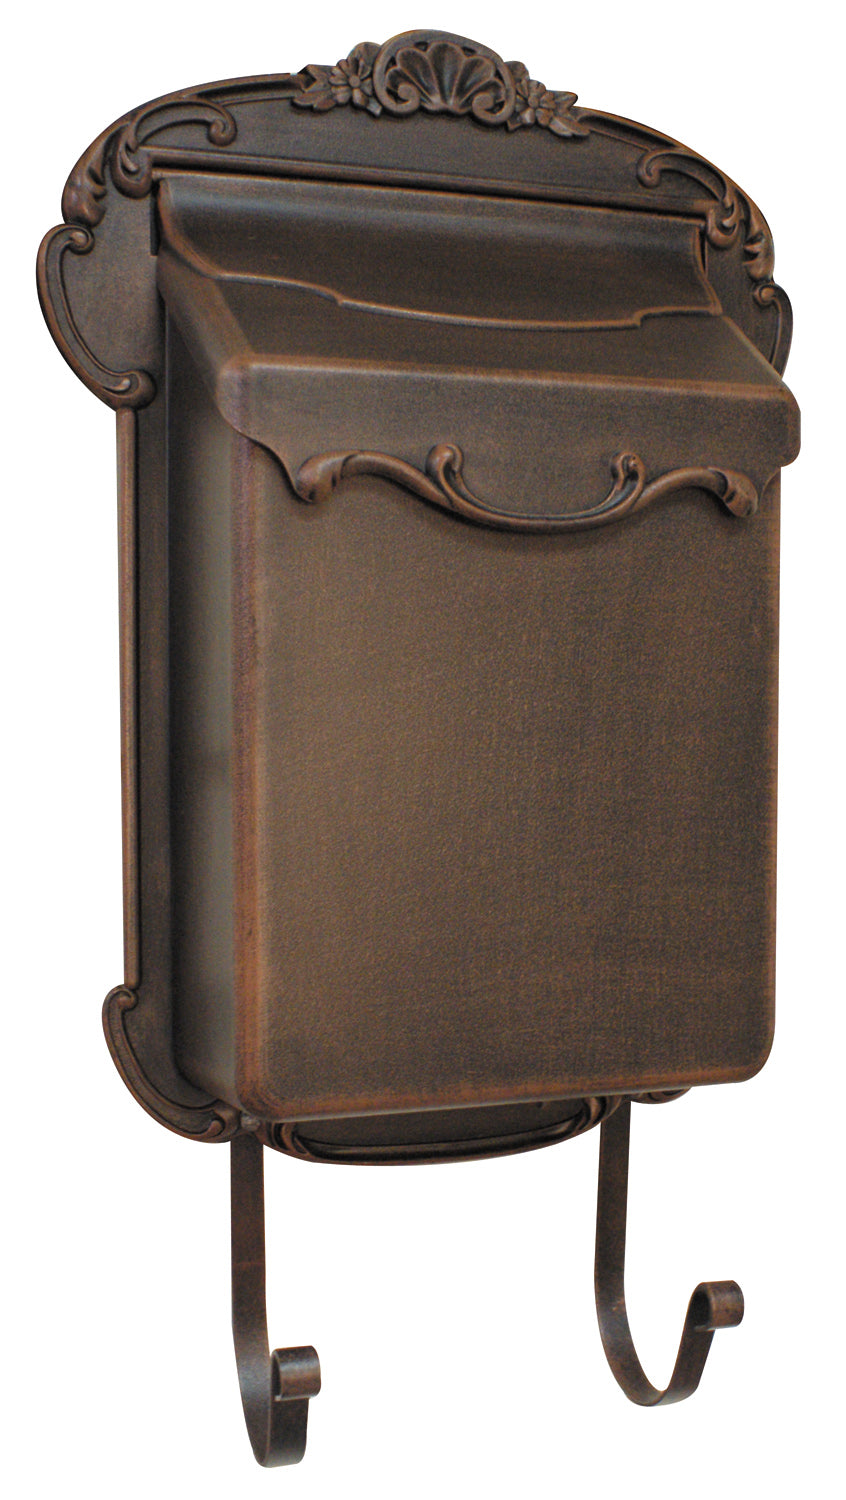 SVV-1013-CP Victoria Vertical Mailbox Residential Wall Mount Aluminum Decorative Design Old World Décor